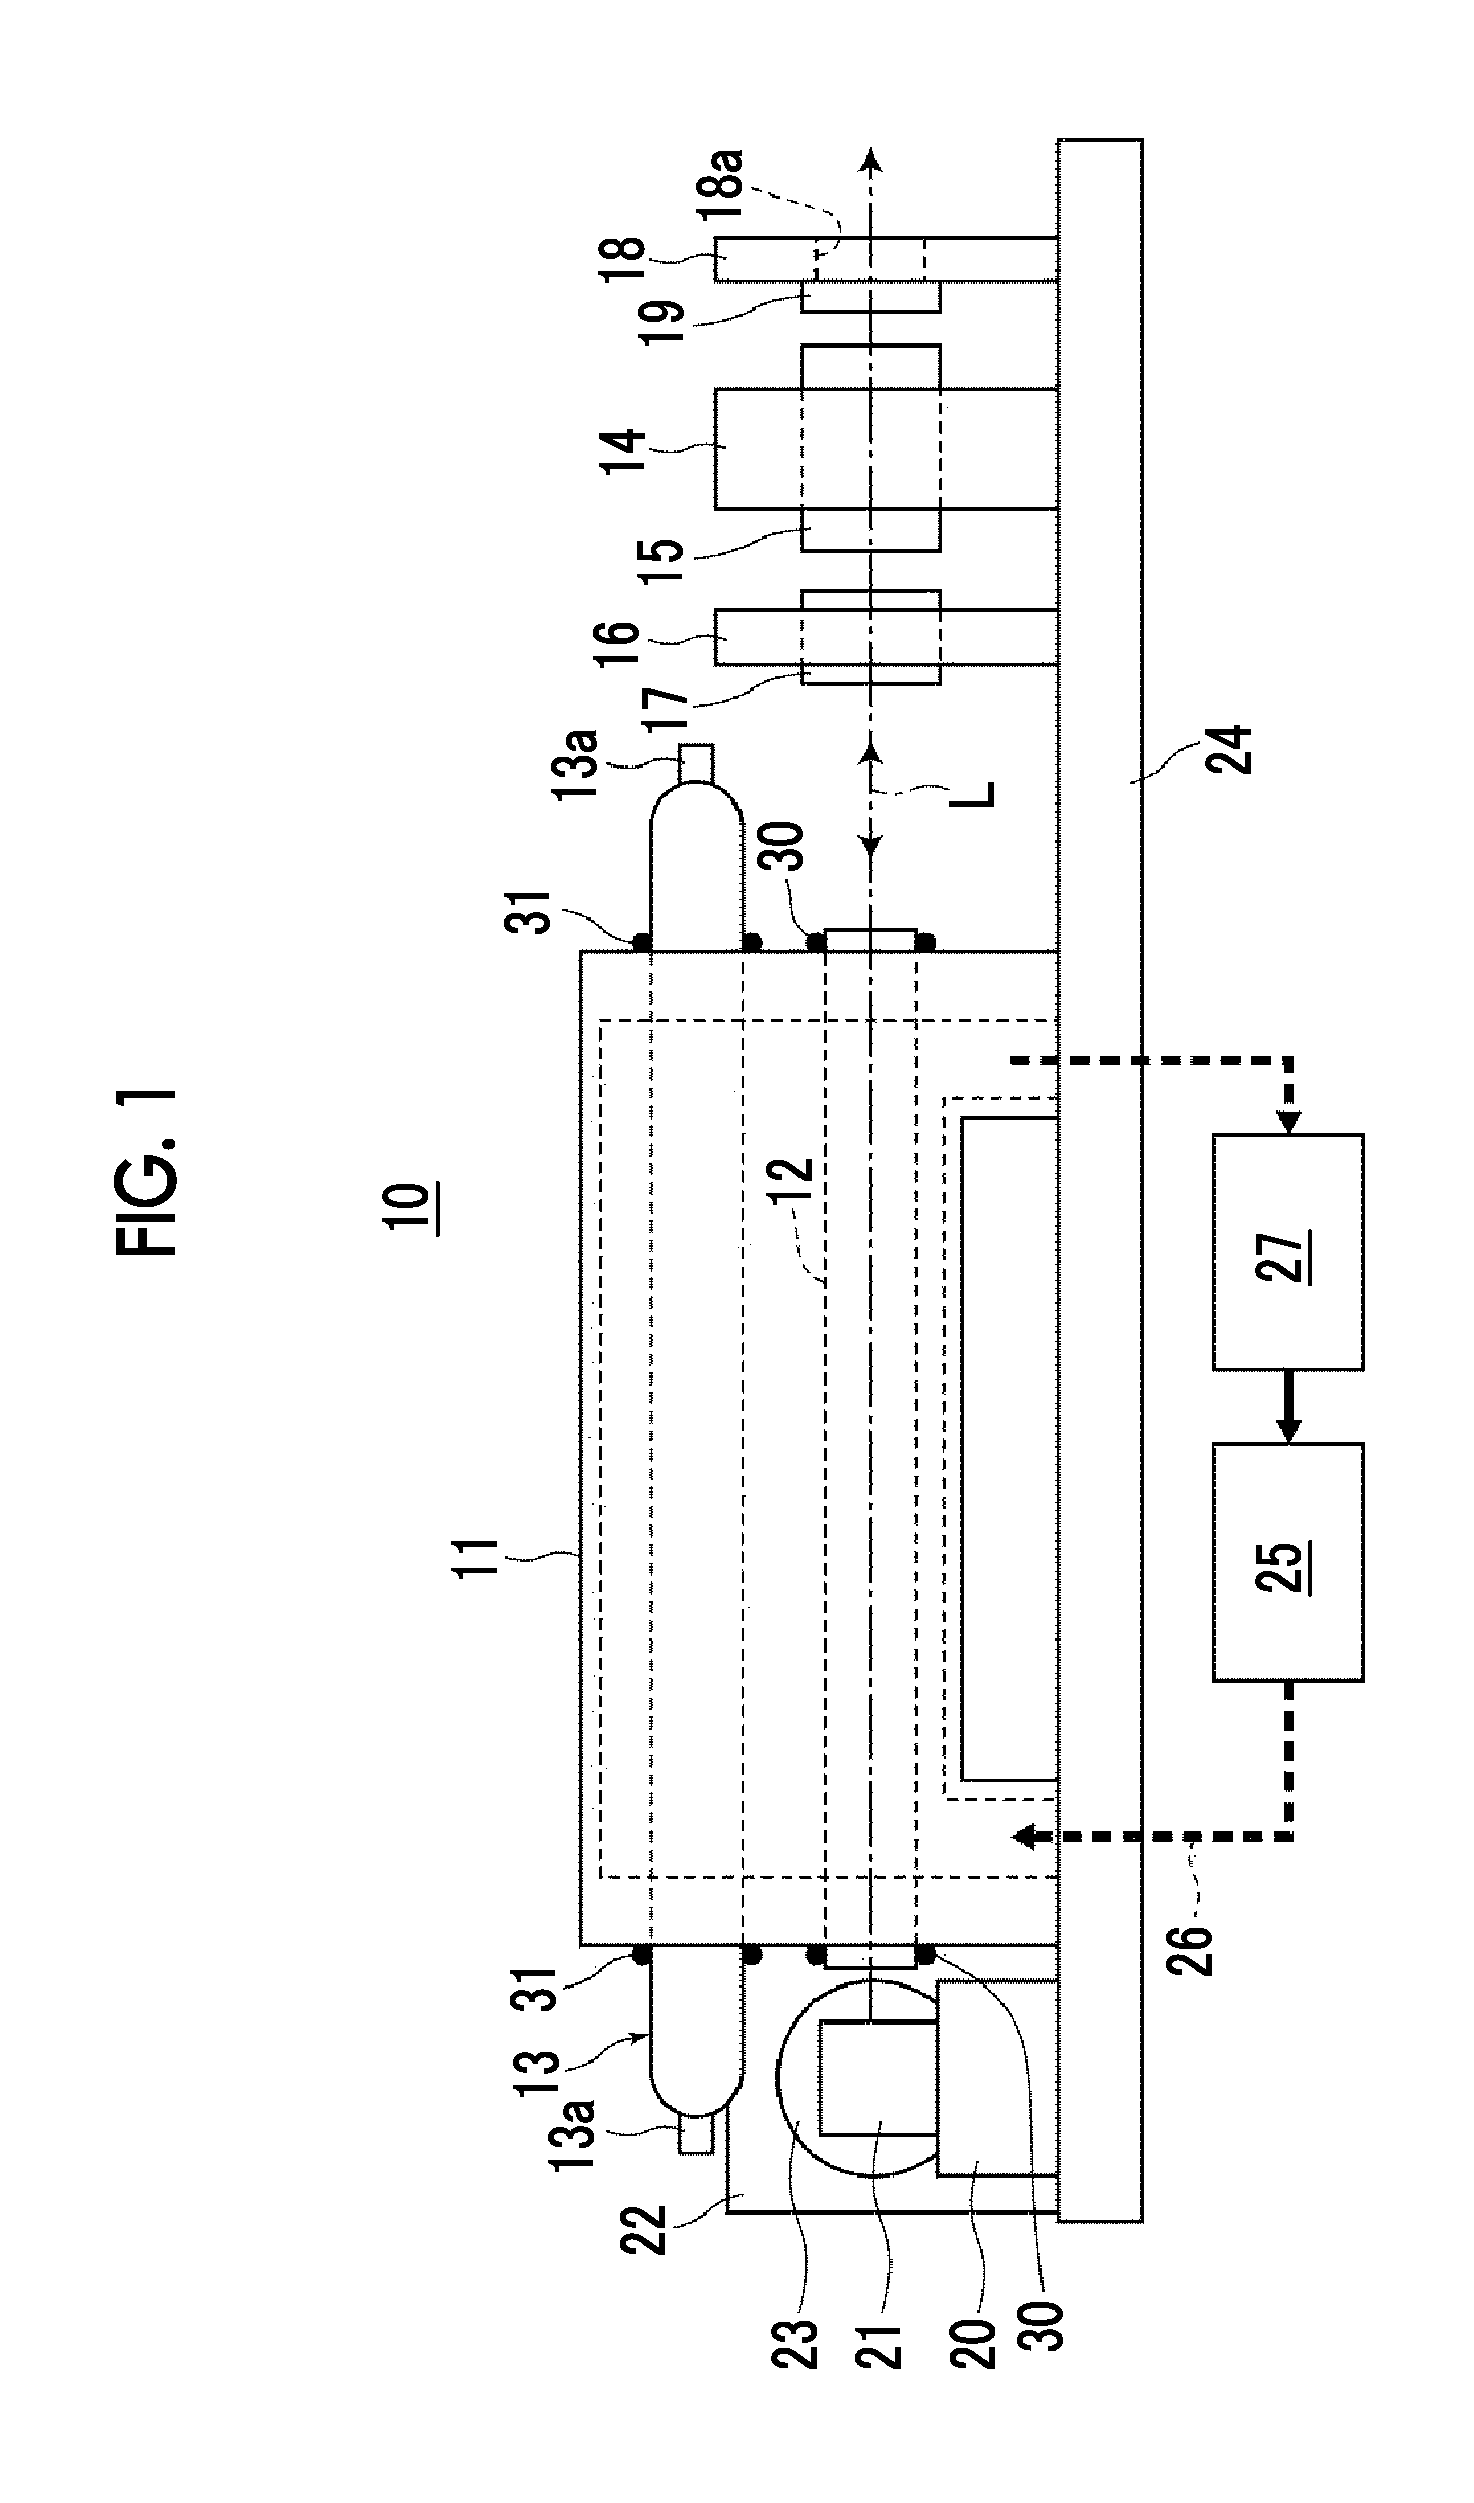 Solid-state laser device and photoacoustic measurement device